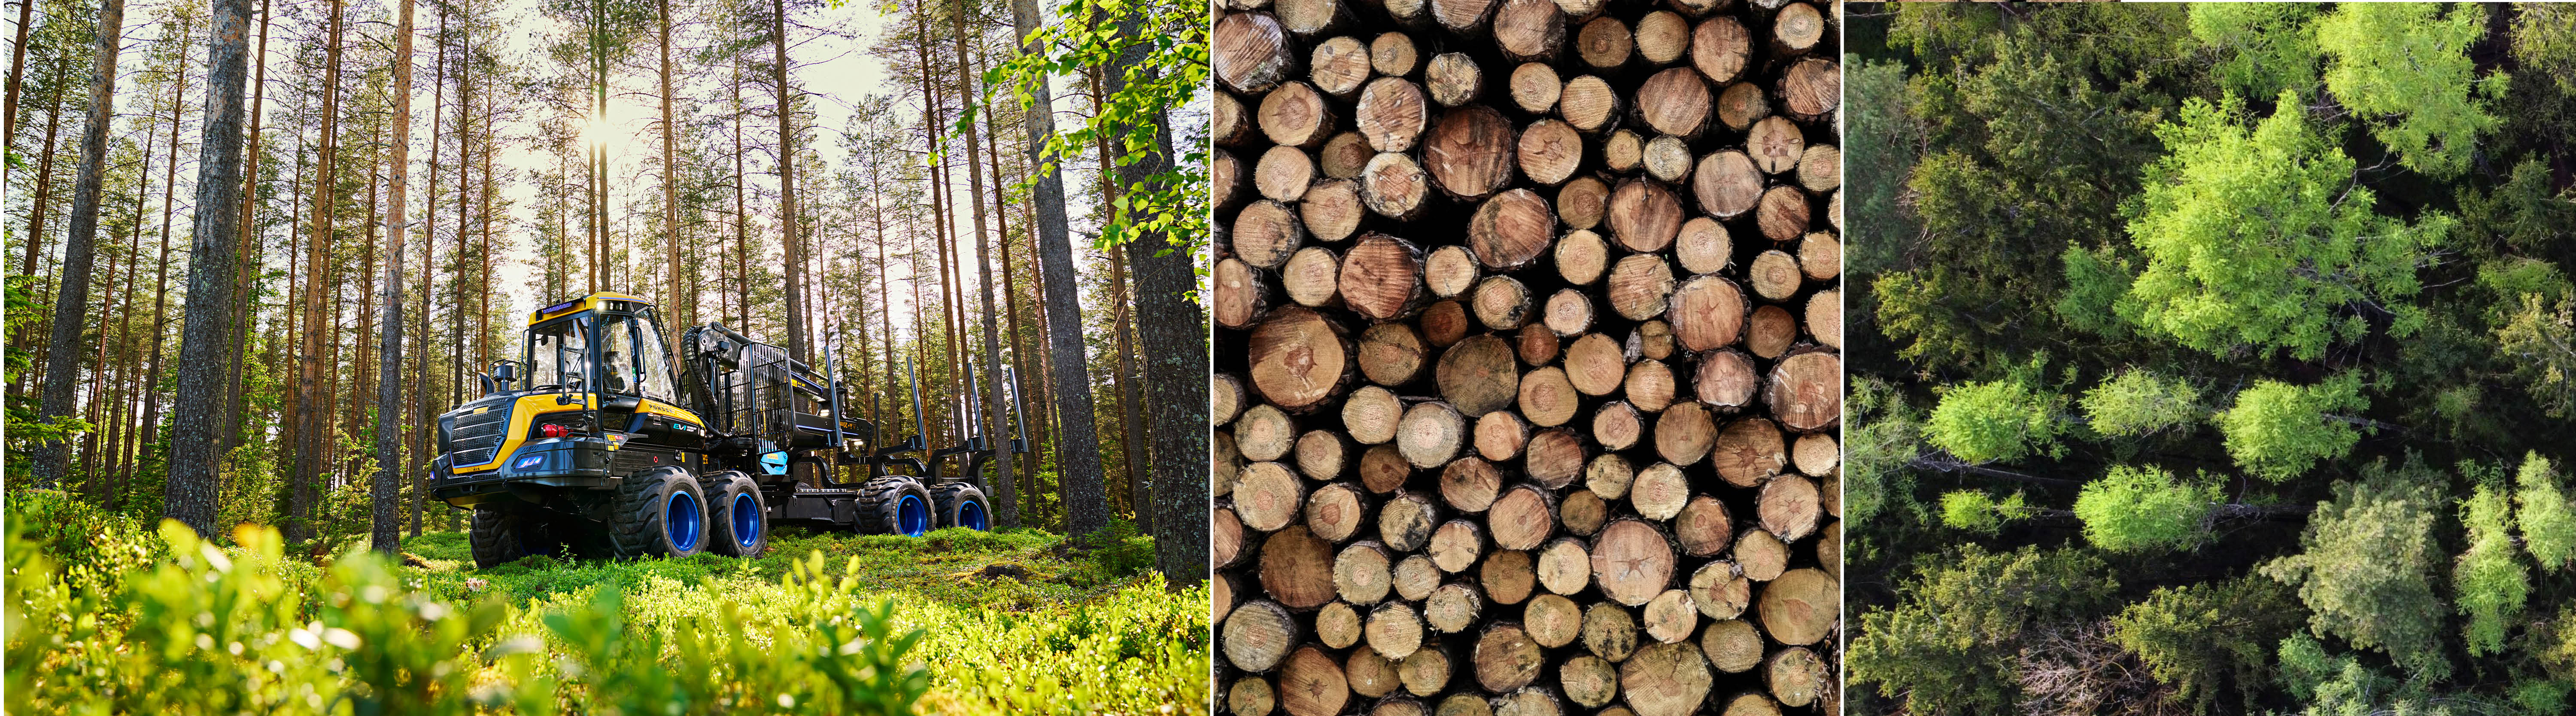 Three images: a forest, logs in a pile, and an electric vehicle logging in a forest